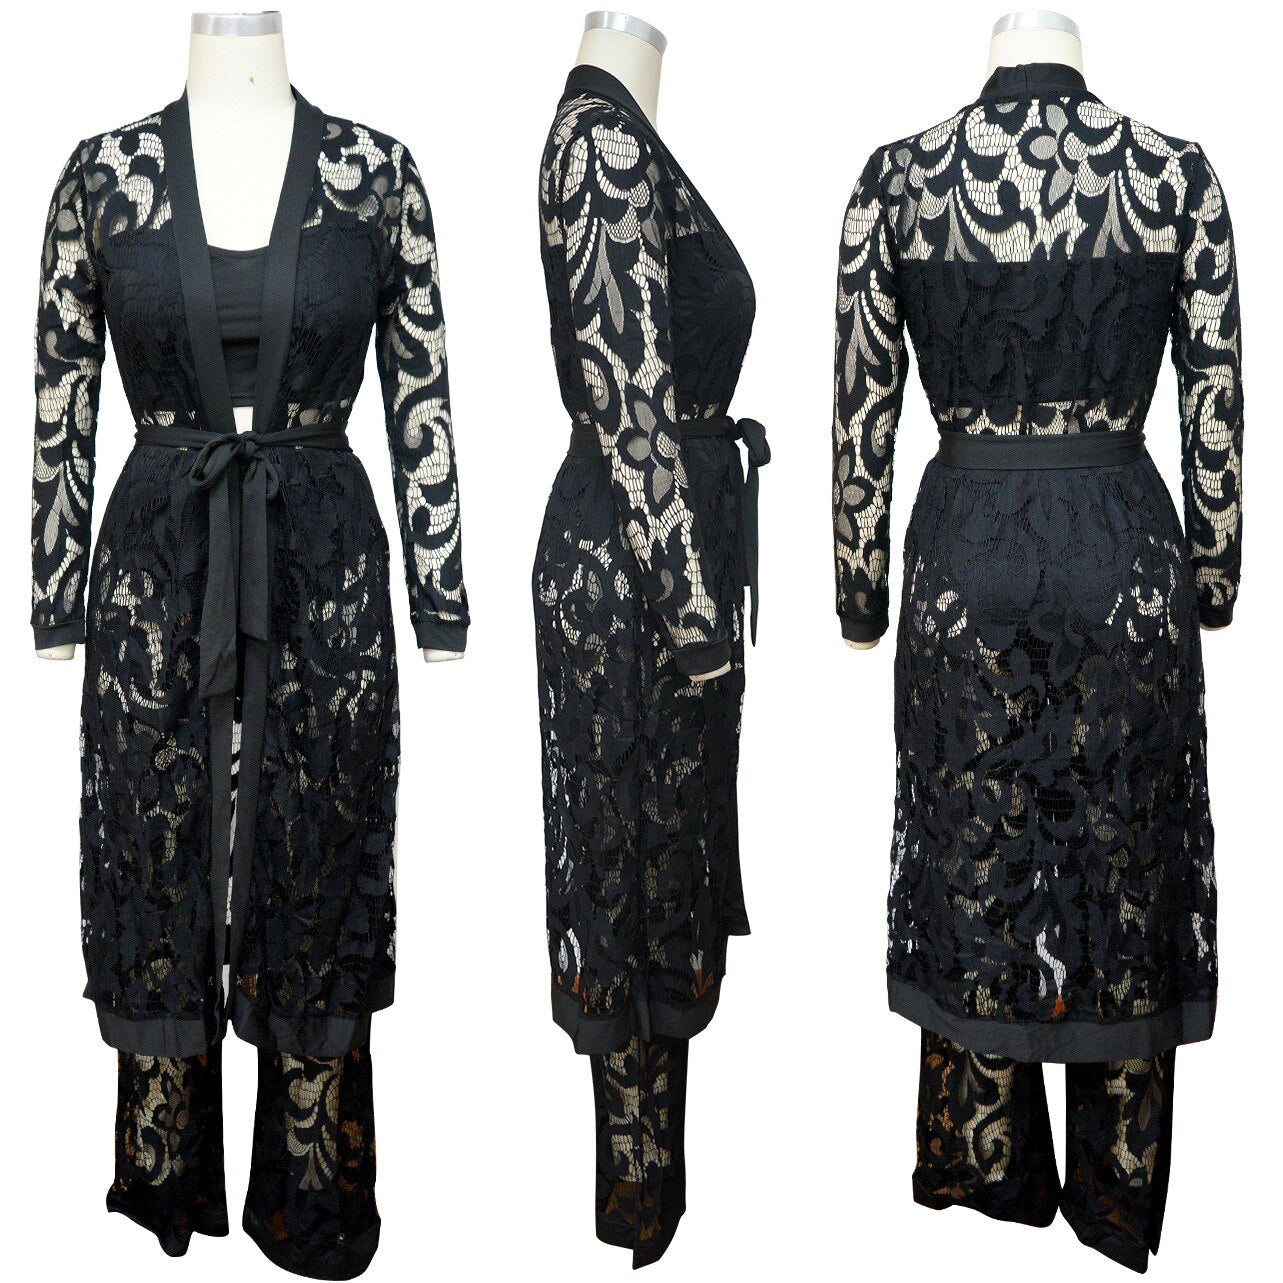 Yipinpay MO Floral Lace Sexy Bodycon Jumpsuit Women Rompers 3 Piece Set Autumn Winter Strap Sashes Long Playsuit Casual Overalls